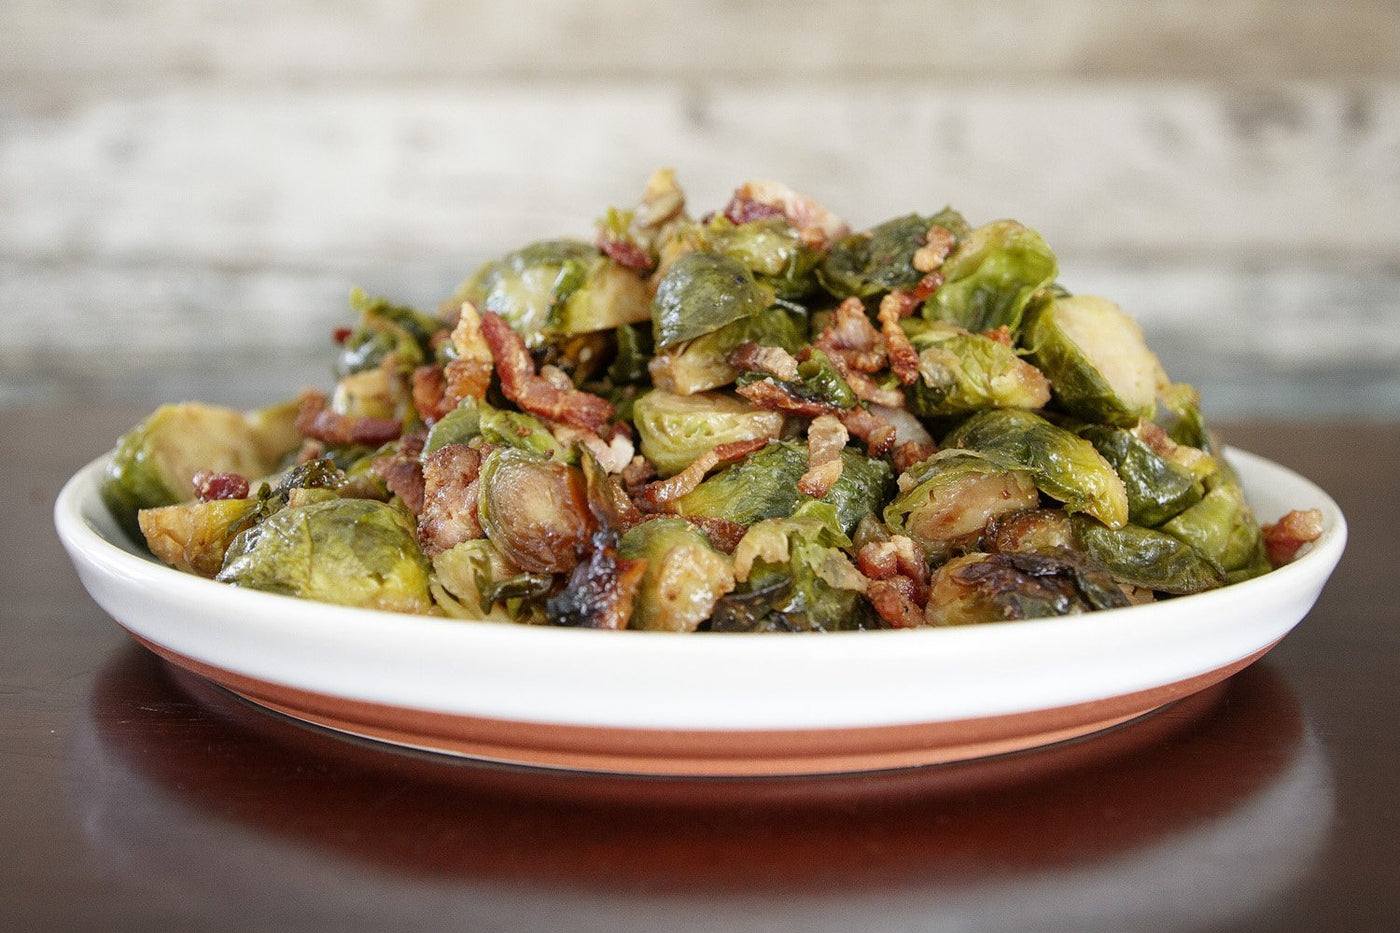 Bacon & Brussels | Pederson's Natural Farms